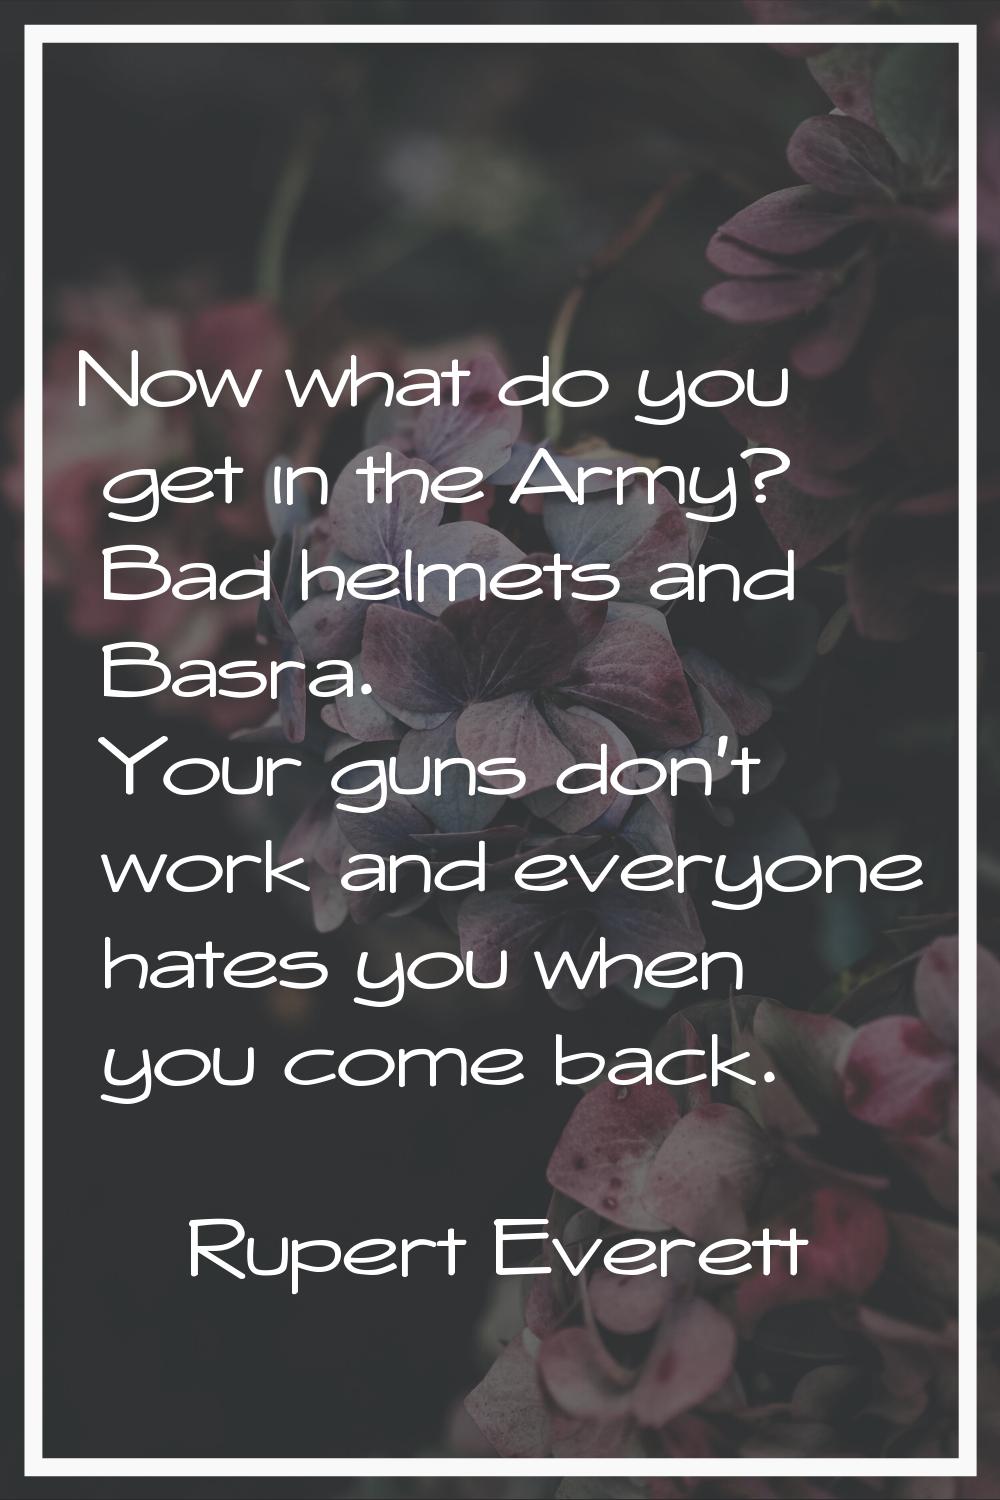 Now what do you get in the Army? Bad helmets and Basra. Your guns don't work and everyone hates you